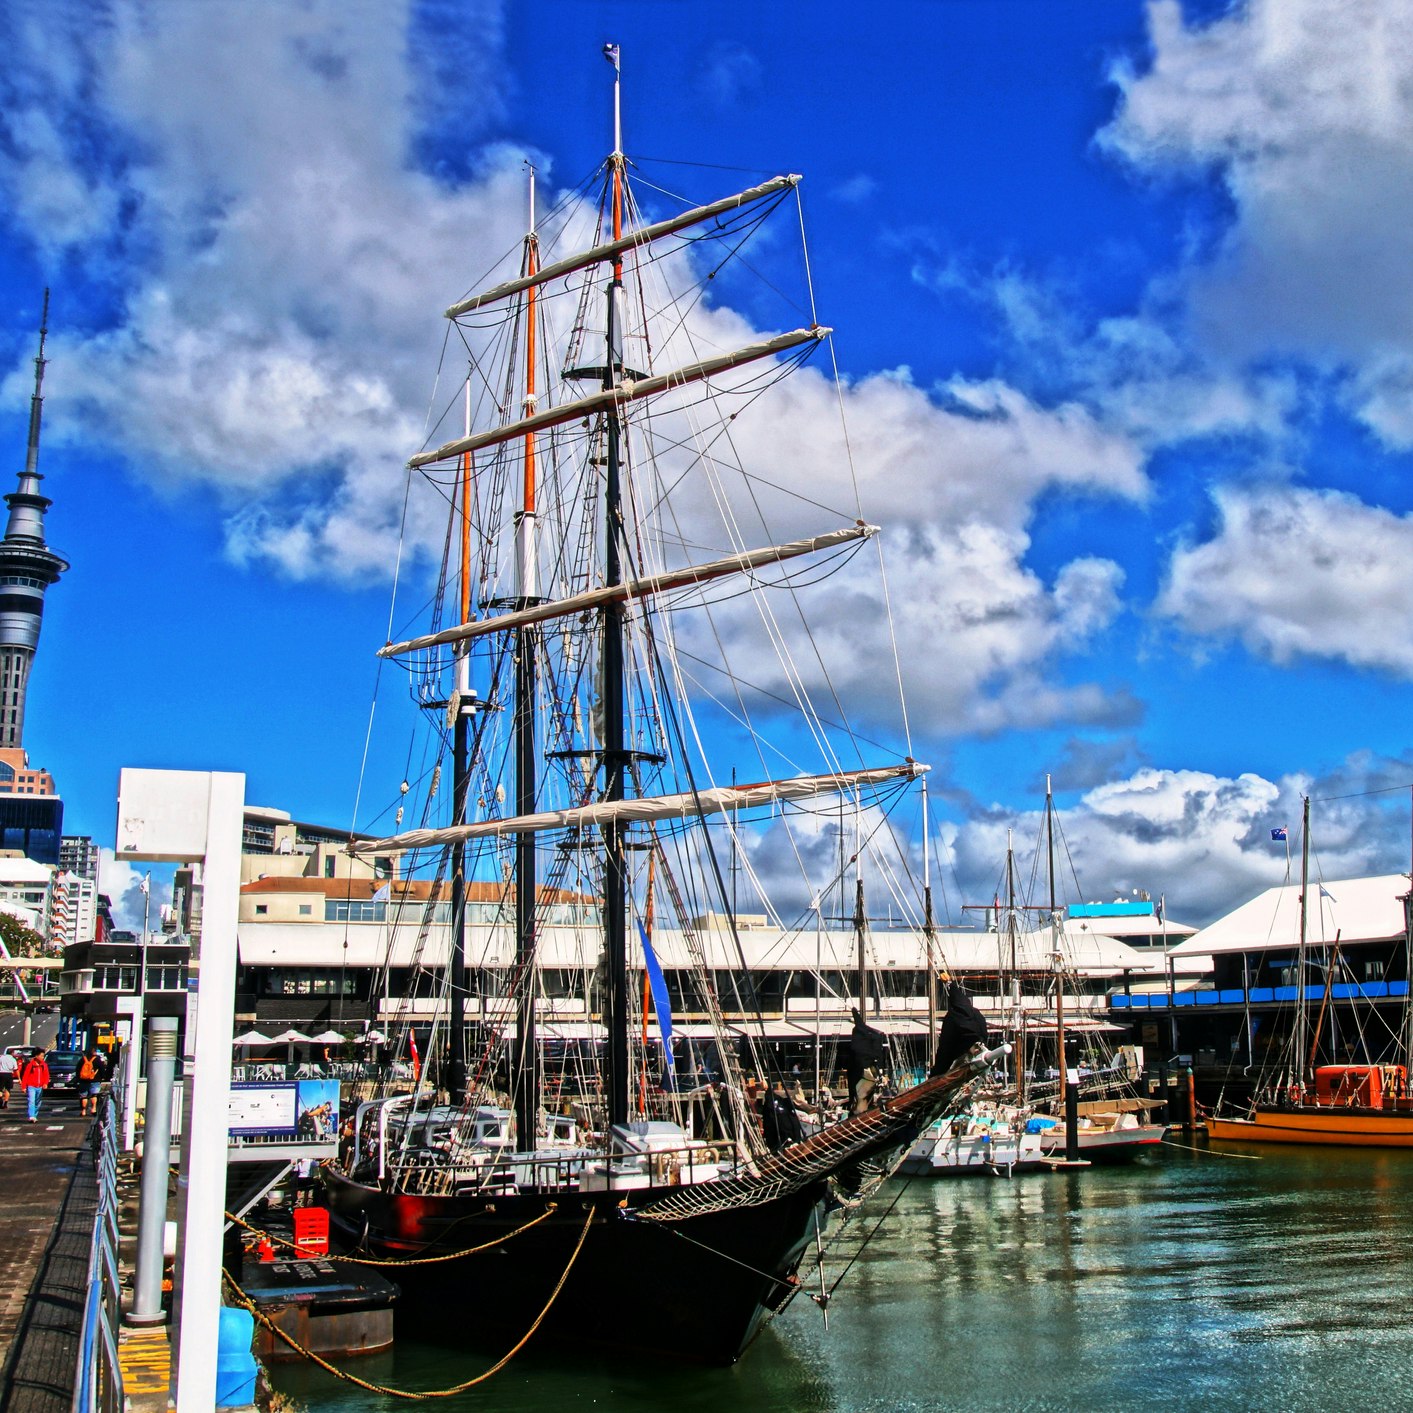 04/07/2017 - Auckland, New Zealand.The New Zealand Maritime Museum (Maori name "Hui Te Ananui A Tangaroa") is located in central Auckland, on Hobson Wharf. It was opened in 1993. It houses exhibitions, documentation and art collections covering the country's naval history from the polynesian times till nowadays. Several seaworthy ships are also docked outside the premises.